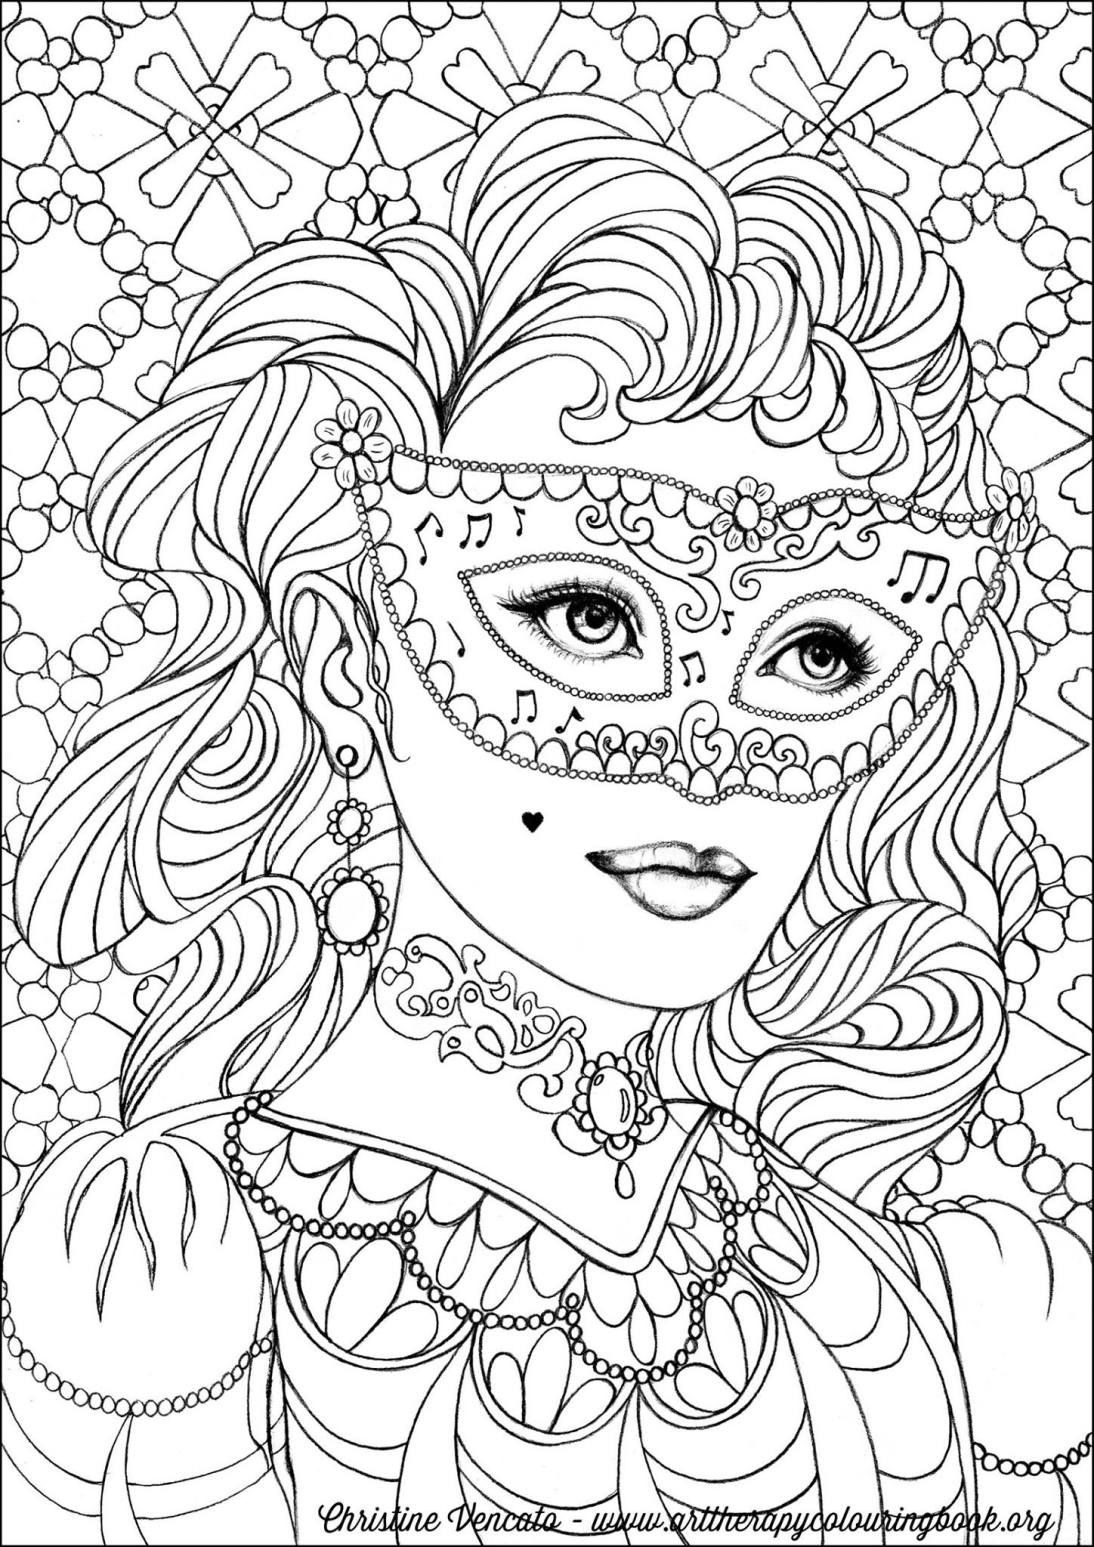 Printable Free Coloring Pages For Adults
 Free Coloring Page From Adult Coloring Worldwide Art by